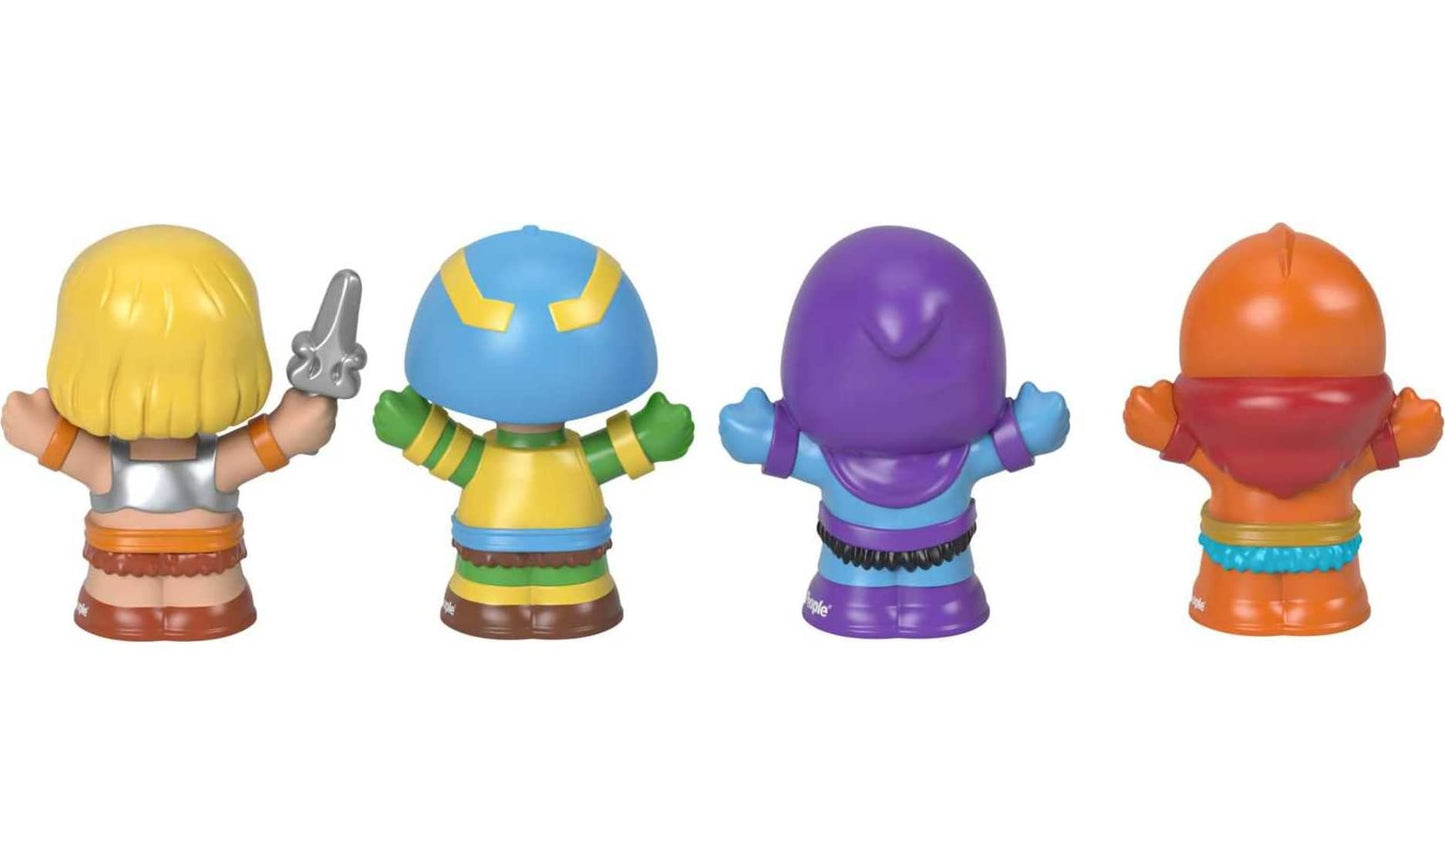 Fisher-Price Little People Collector Masters of The Universe Figure Set, 4 Character Figures in a Giftable Package for Fans Ages 1-101 Years